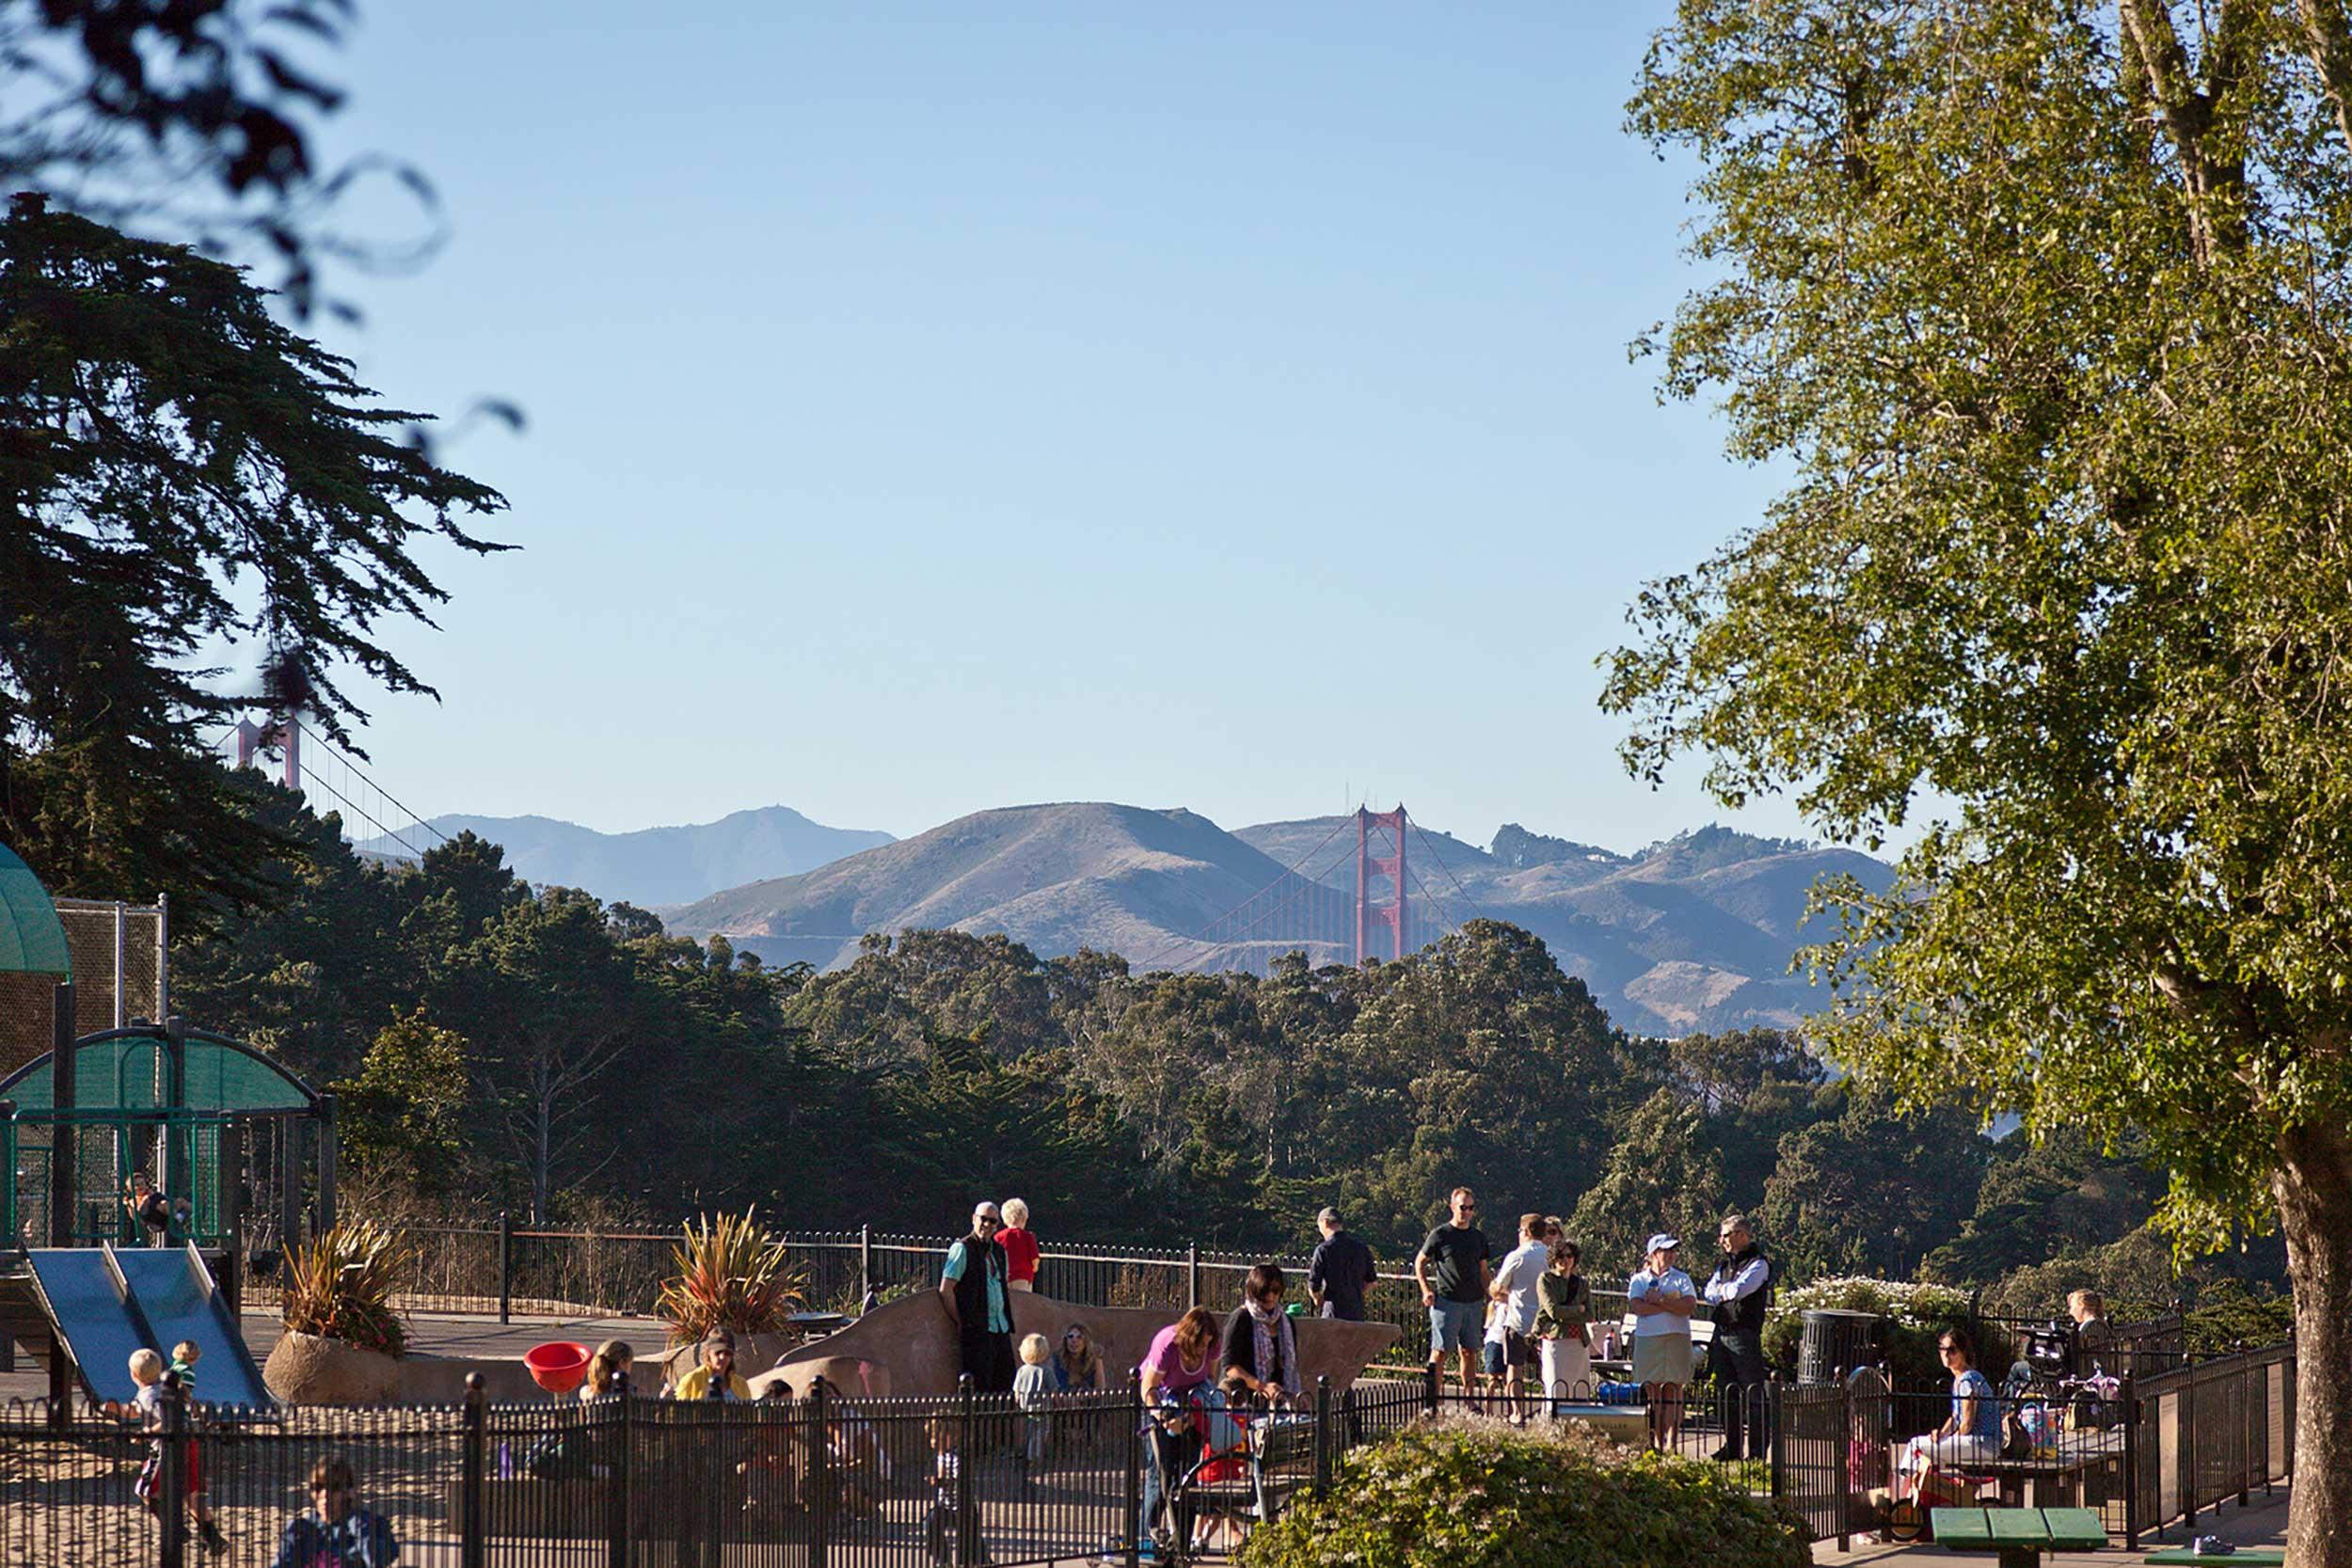 Presidio Wall Playground with the Golden Gate Bridge in the background. Photo by Jay Graham.